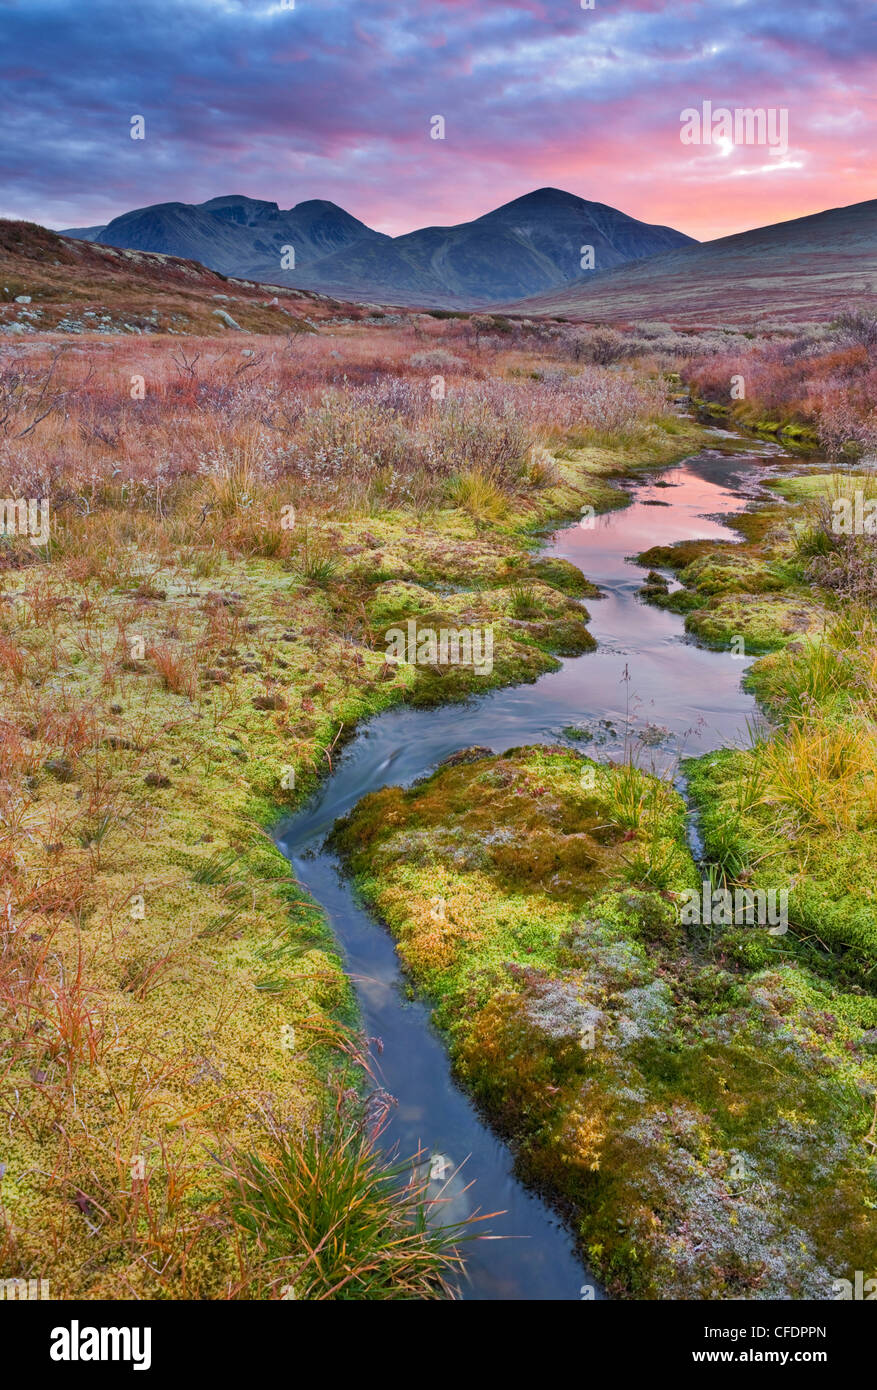 Mossy banks of a stream, Rondane National Park, Norway, Europe Stock Photo